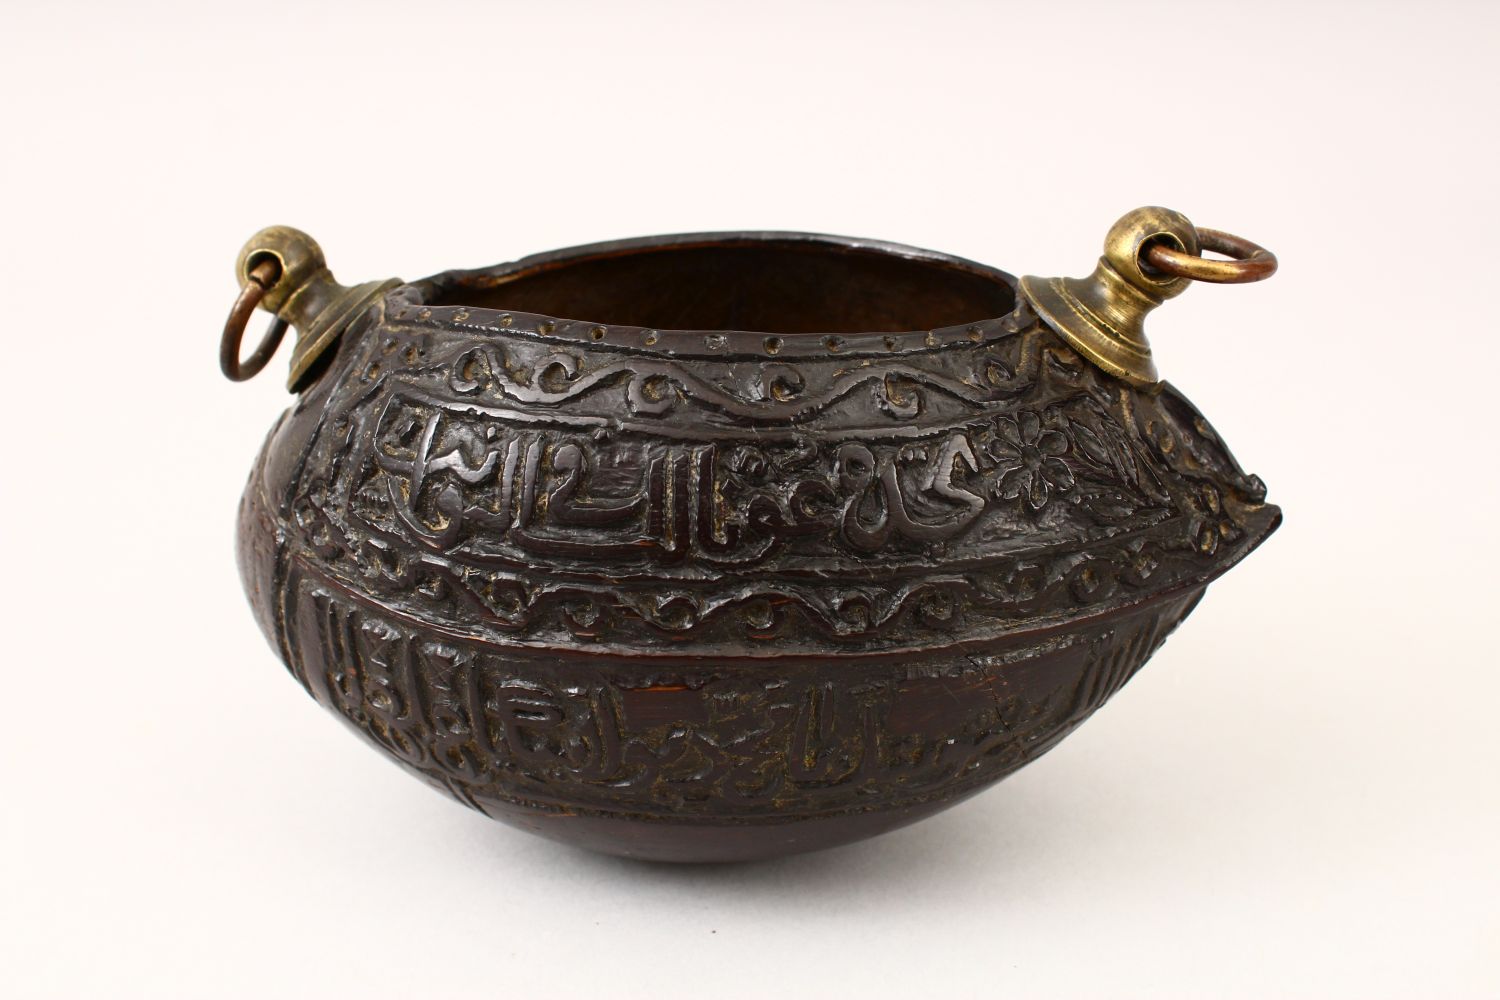 A GOOD 19TH CENTURY ISLAMIC COCO KASHKOOL, carved with Islamic calligraphy and scroll decoration - Image 3 of 14